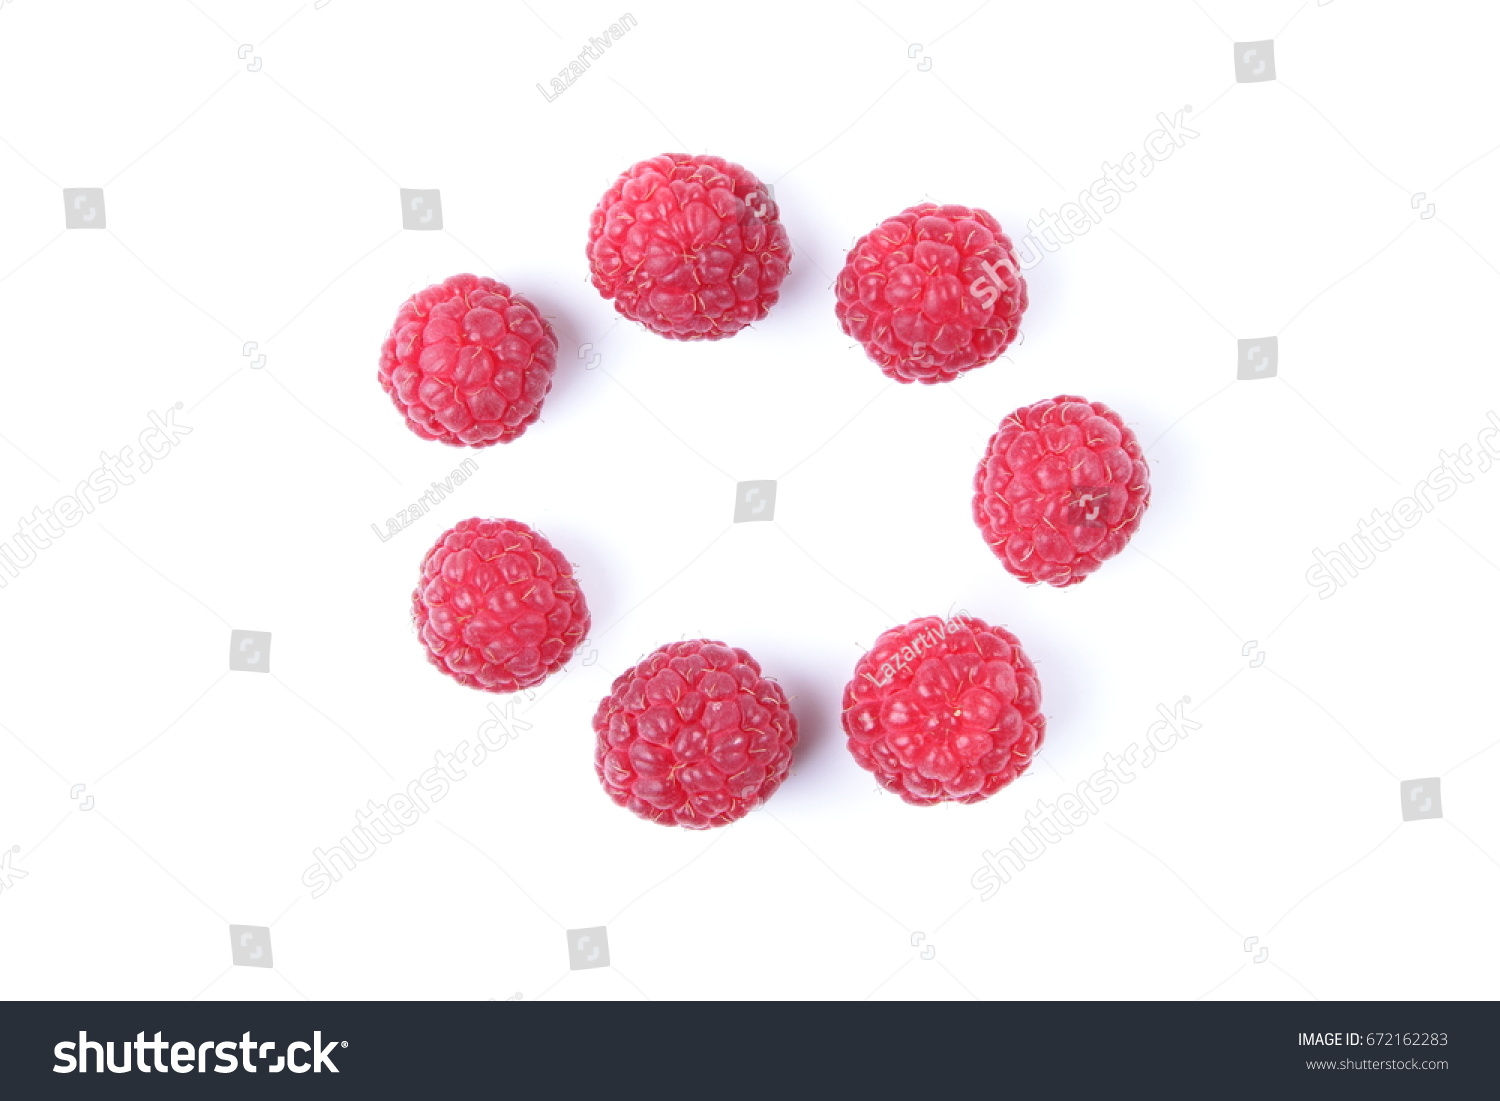 Raspberry on a glossy surface #672162283